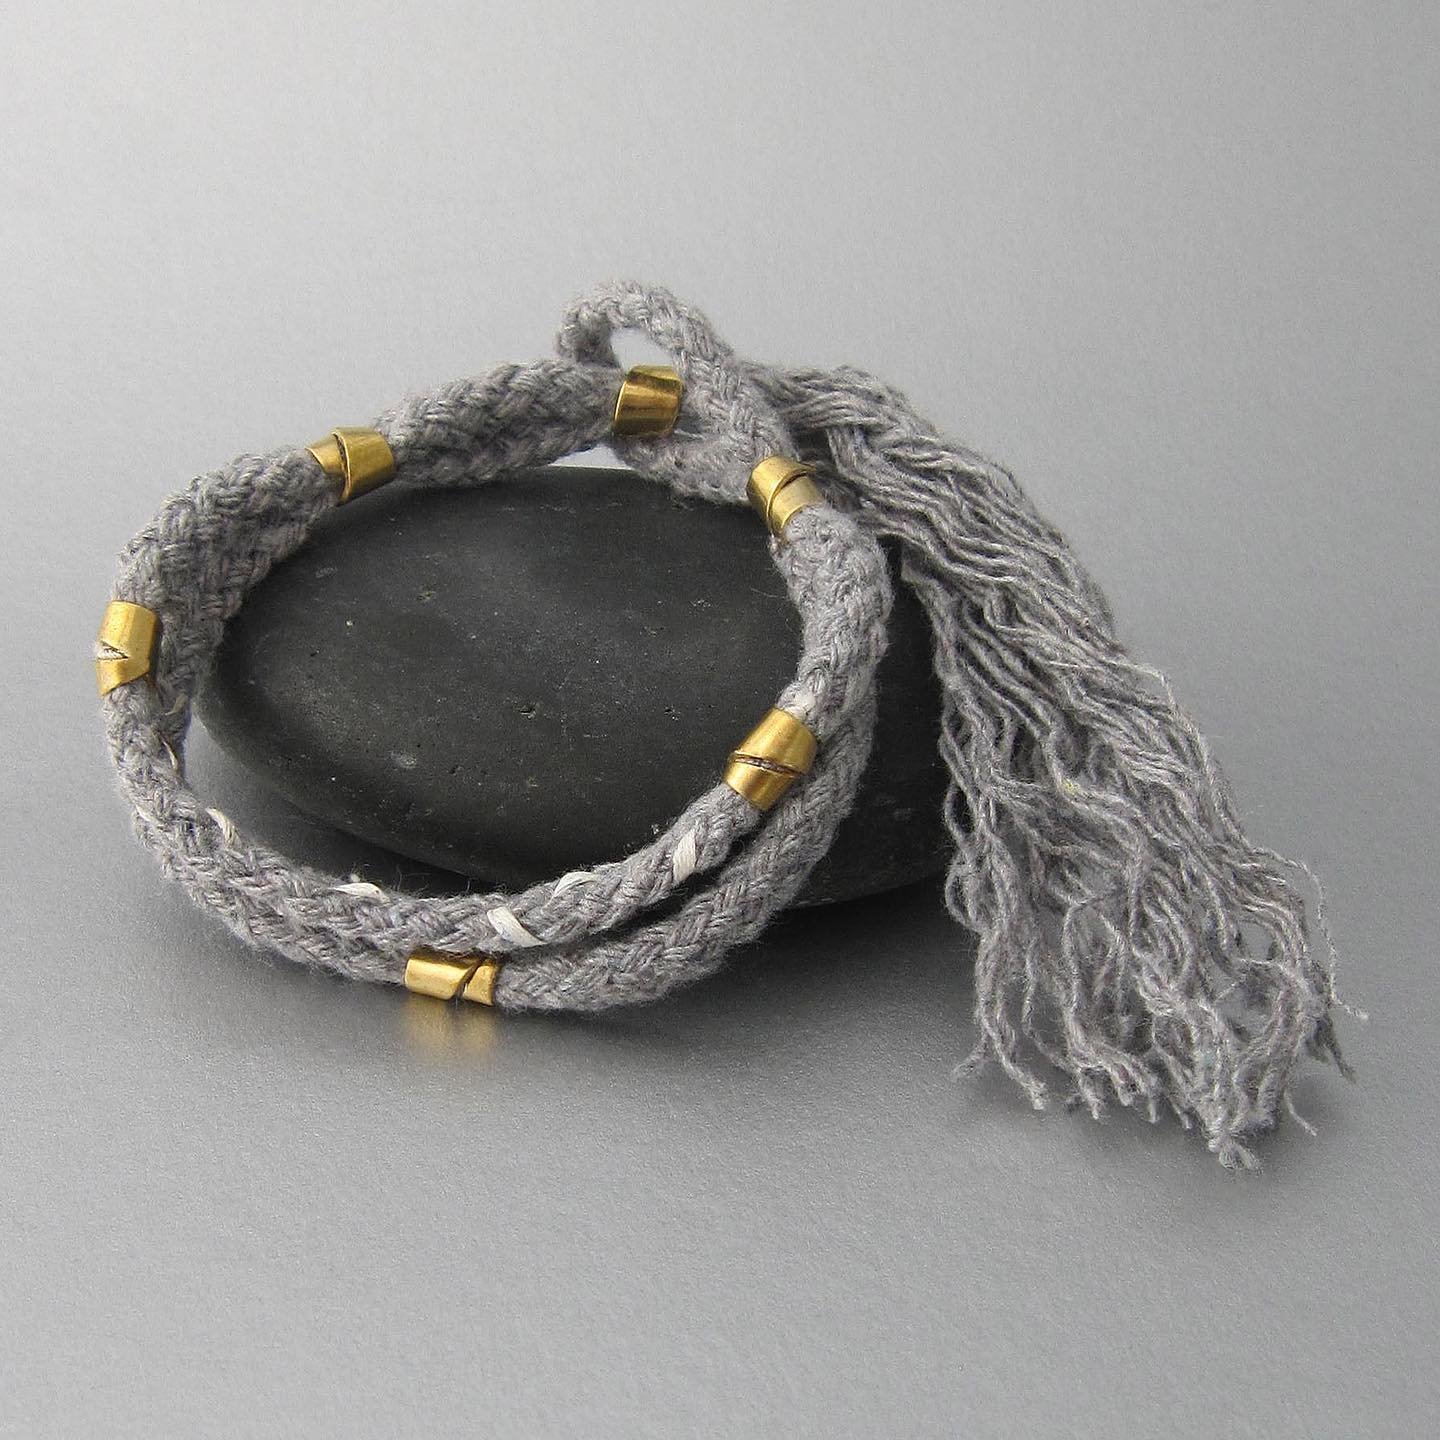 A sustainable piece &ndash; perfect for Fall - from my handmade textile collection: the &ldquo;bacone da seta molle bracelet&rdquo;, inspired by a gold silkworm. These organic-looking, adjustable, unisex, and unique  bracelets, available in different